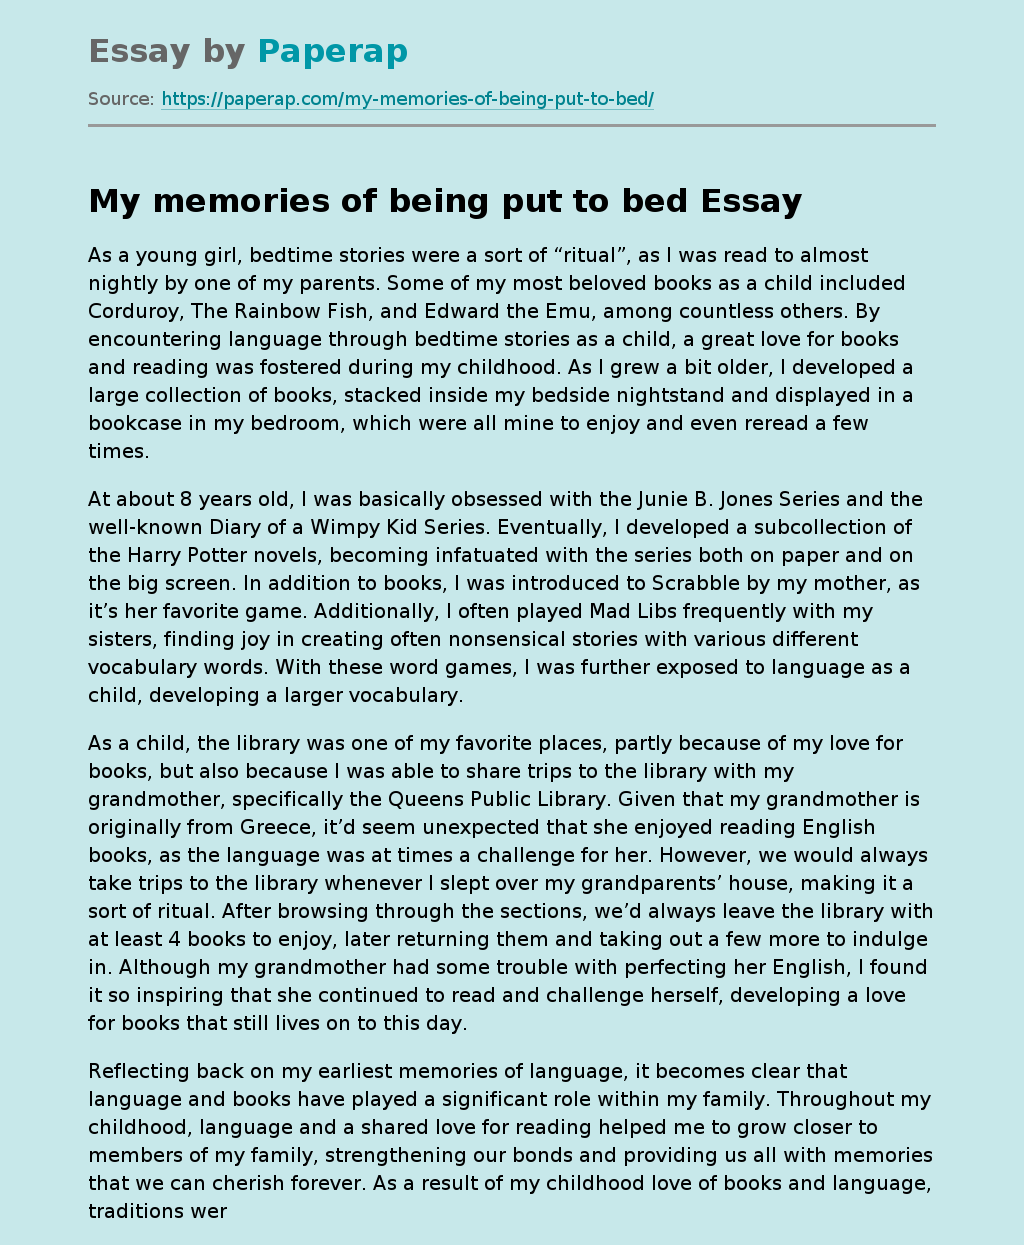 My memories of being put to bed